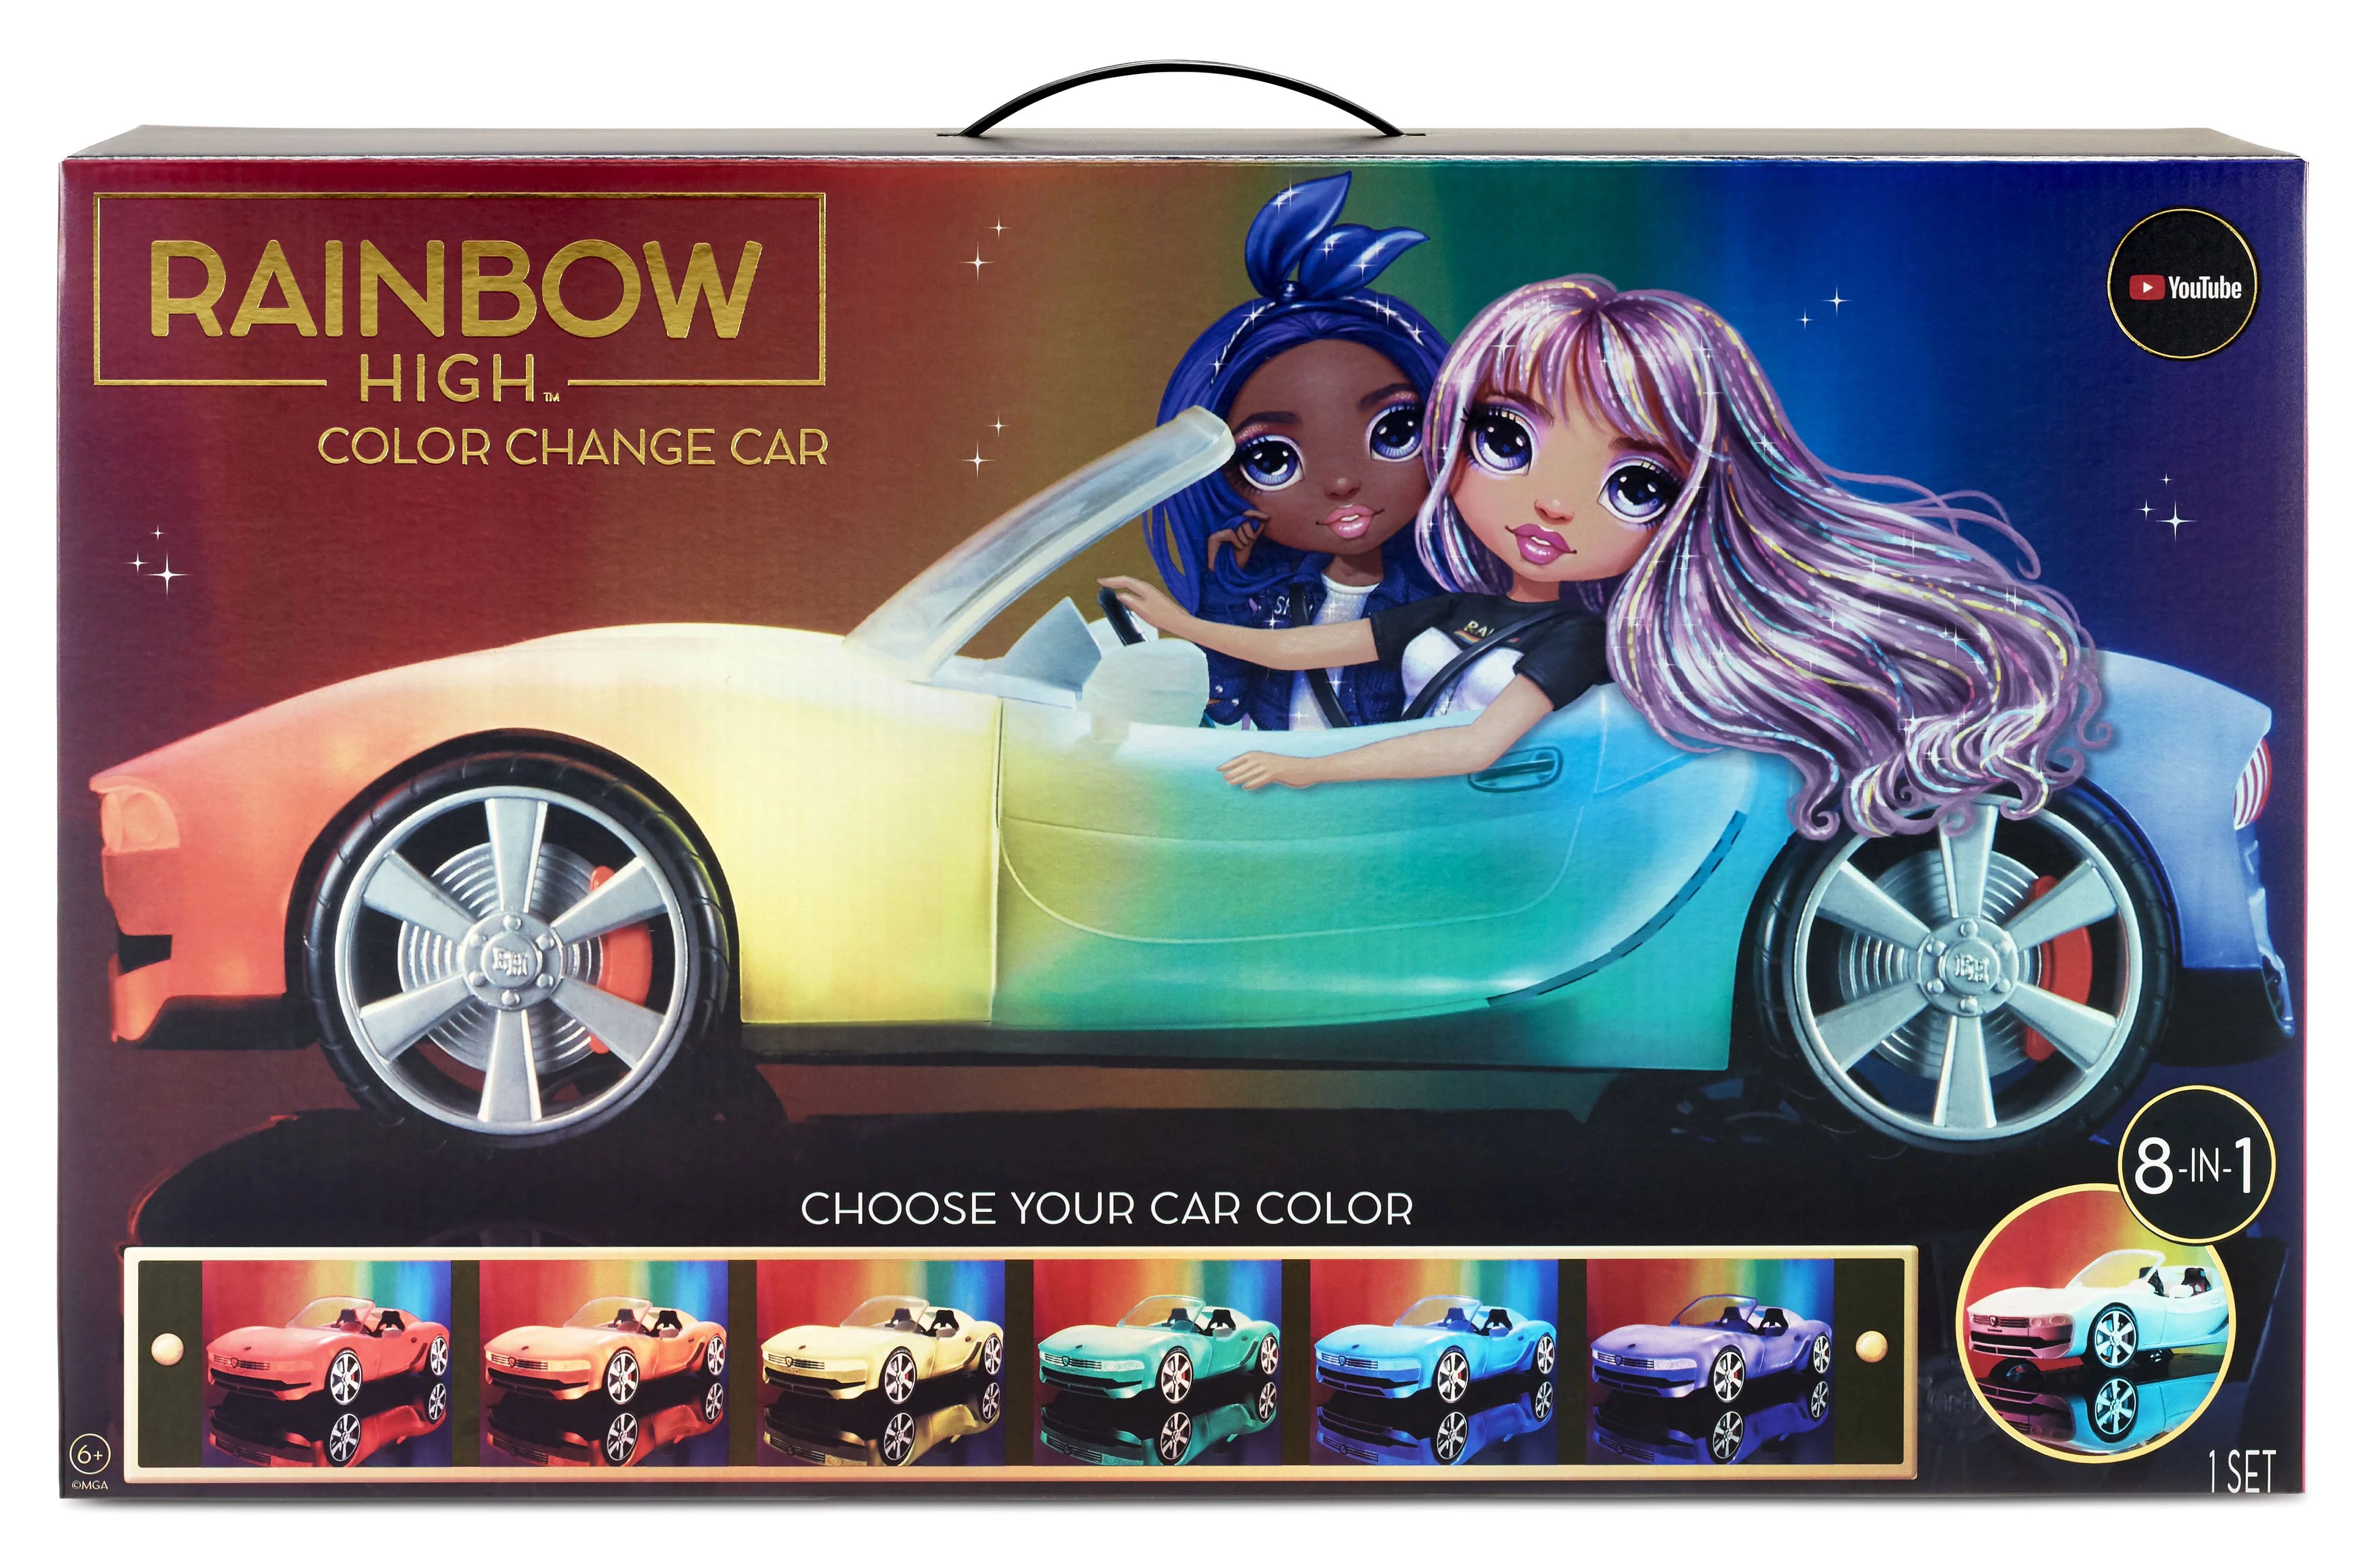 Rainbow High Color Change Car - Convertible Vehicle, 8-in-1 Light-Up, Multicolor, Fits 2 Fashion ... | Walmart (US)